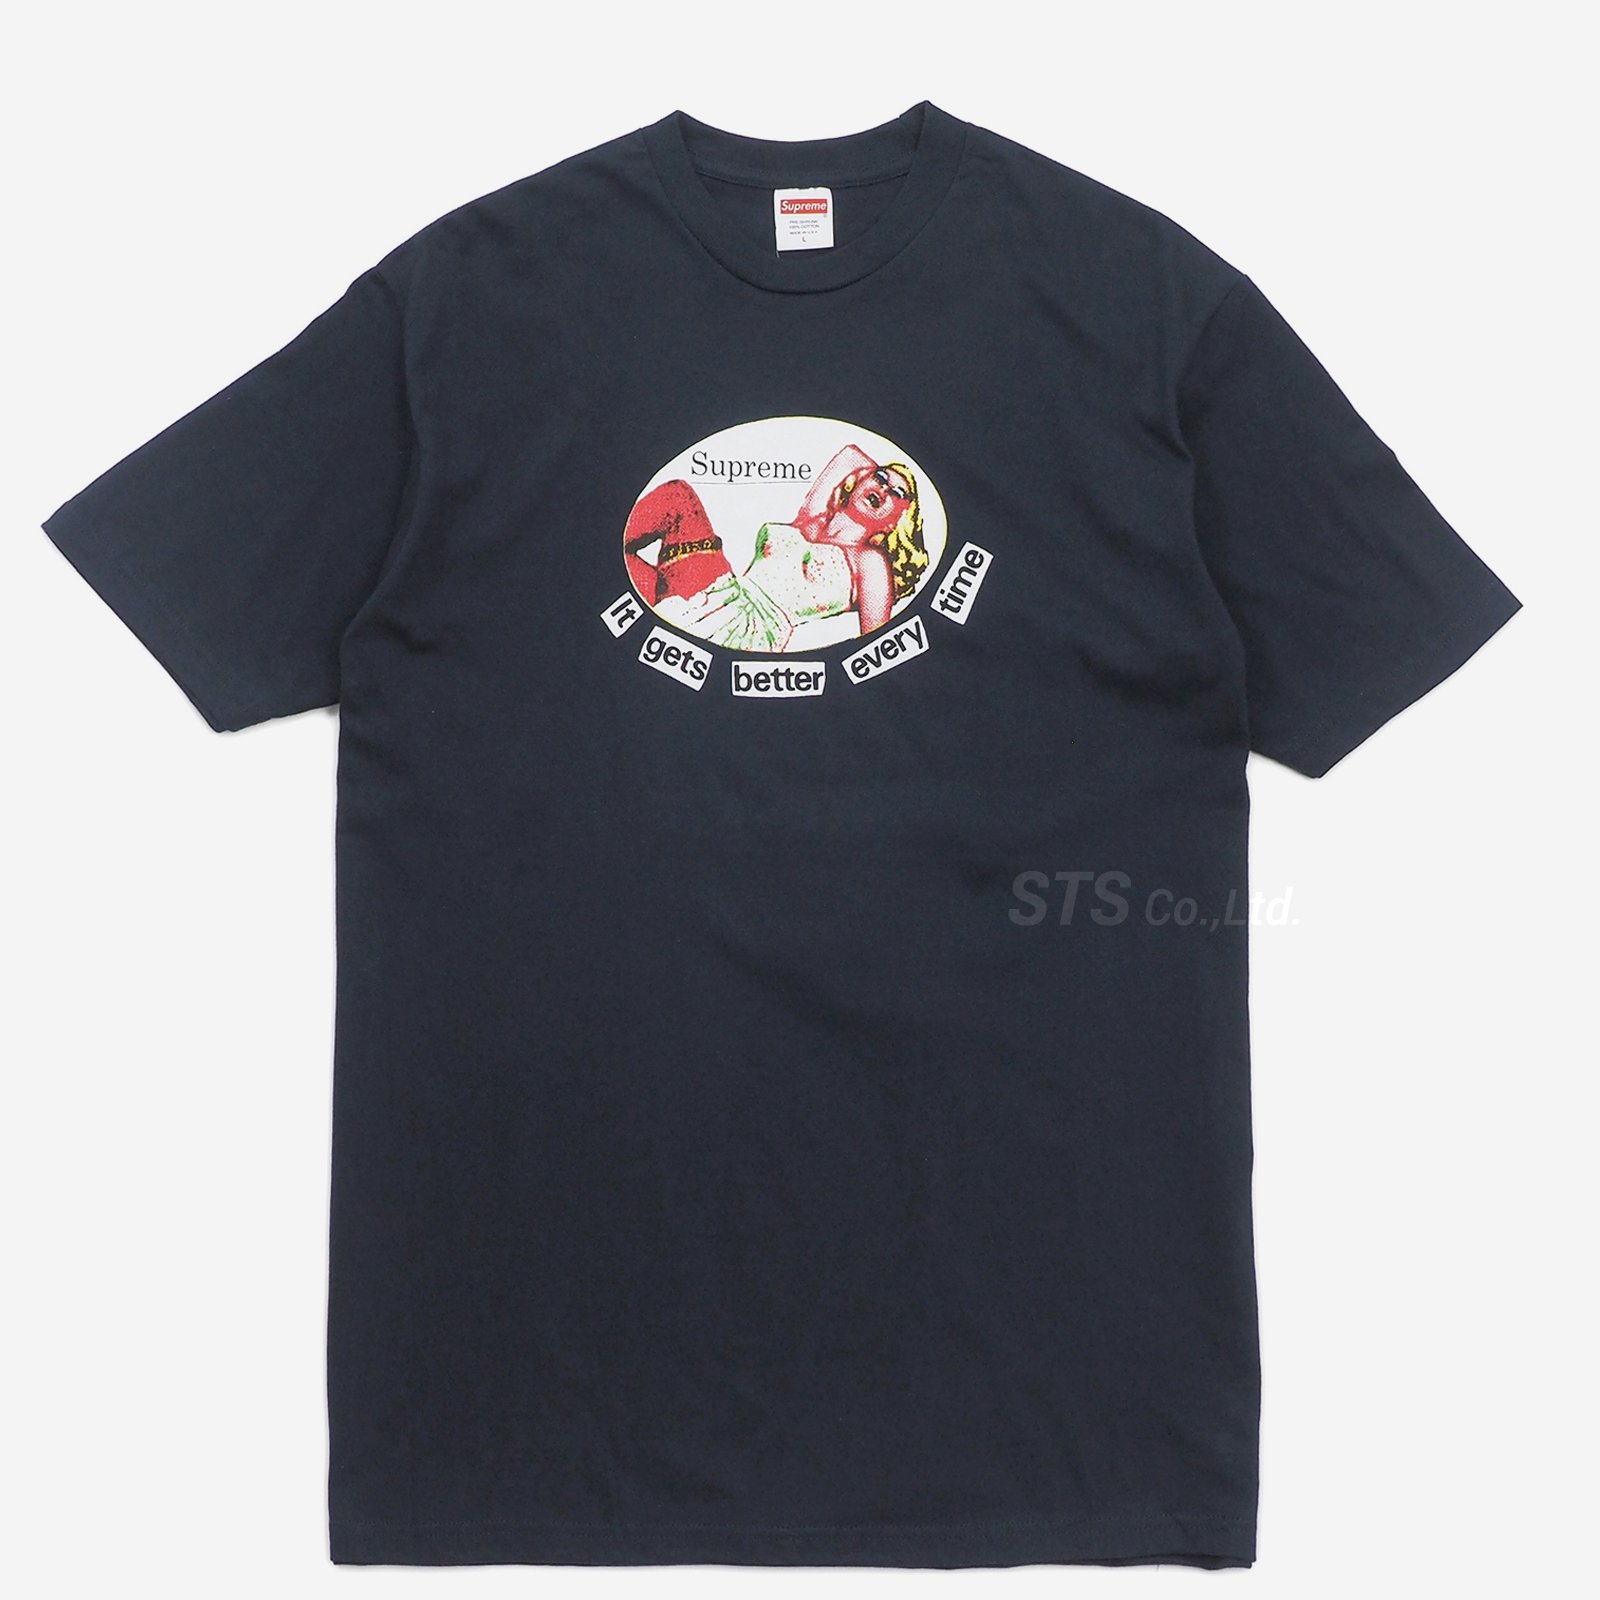 Supreme It Gets Better Every Time Tee XL